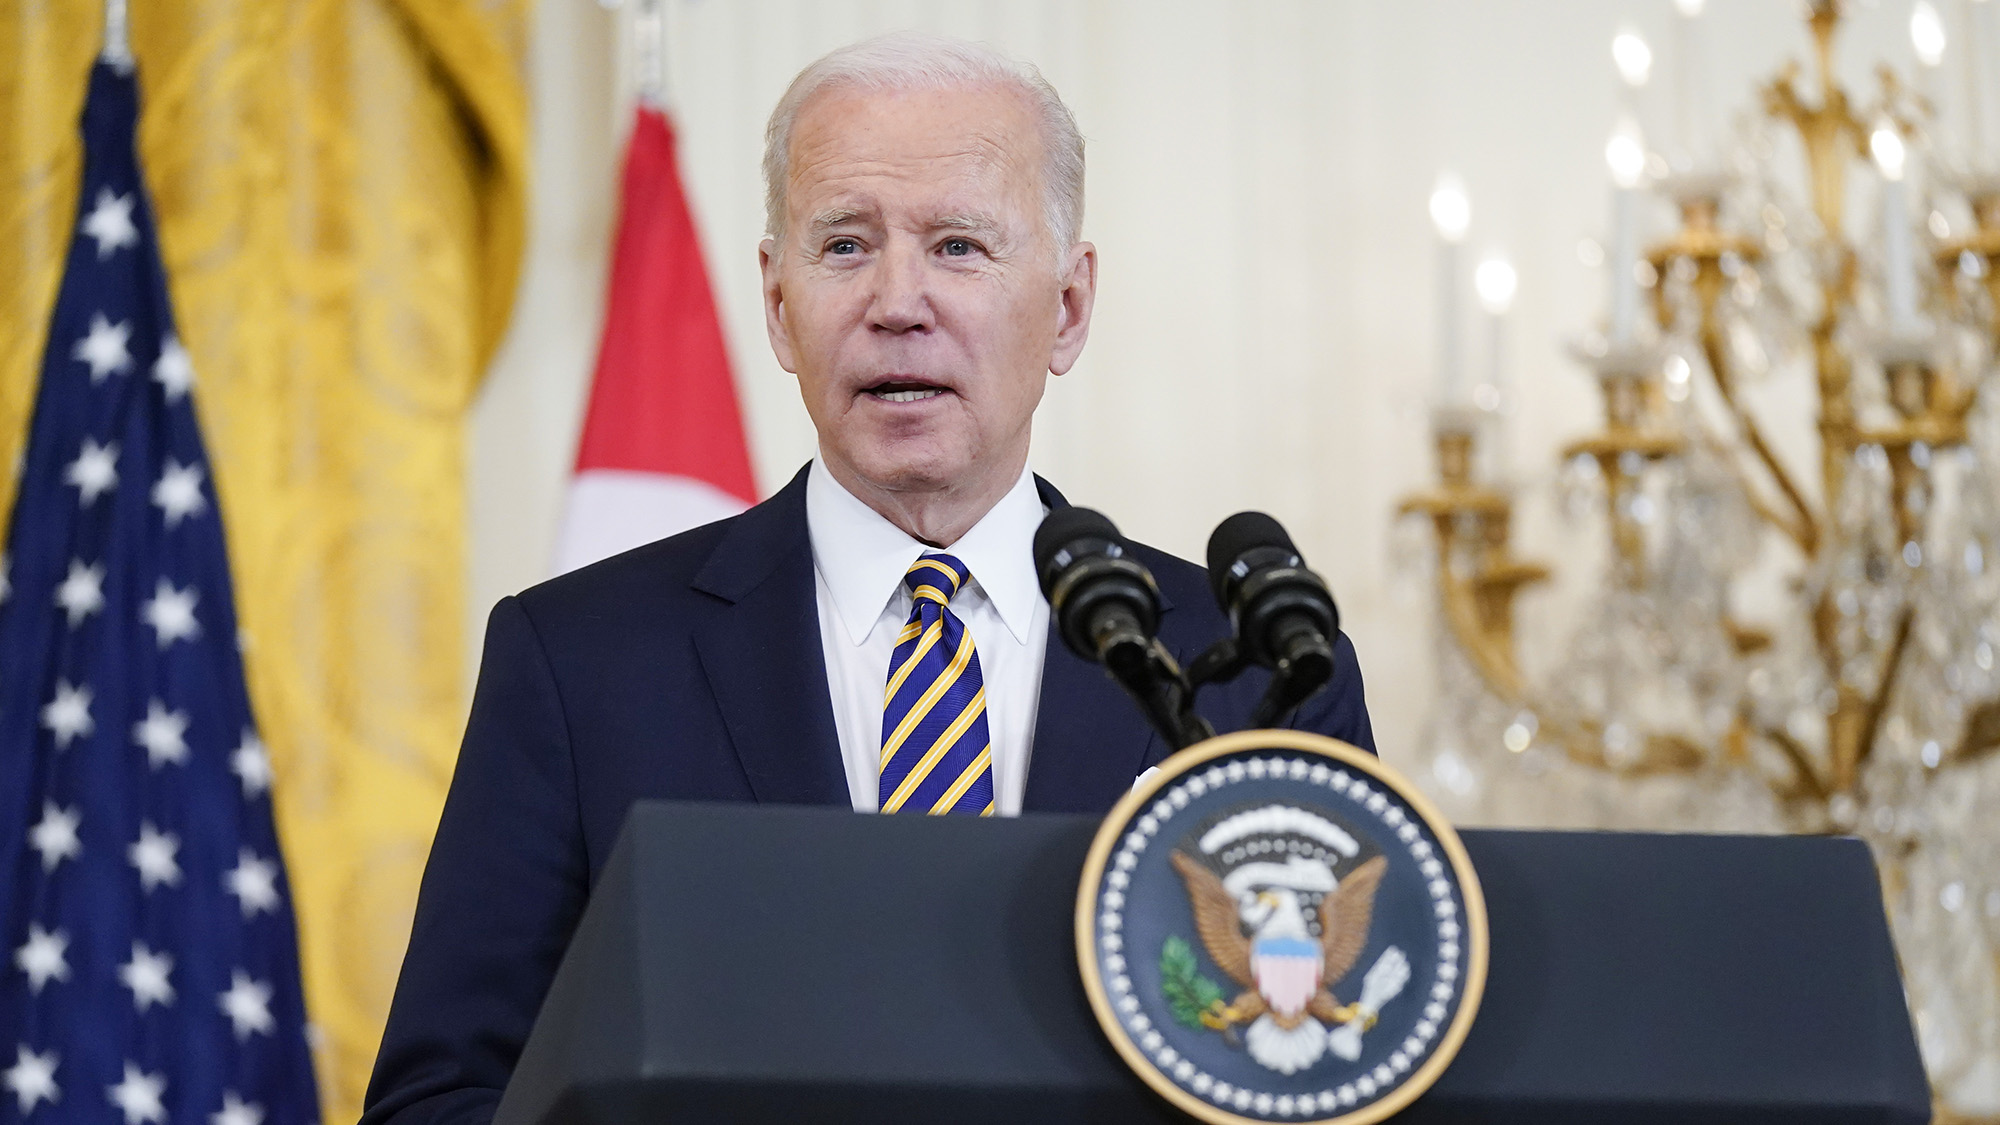 President Joe Biden speaks with the media during a visit by Singapore's Prime Minister Lee Hsien Loong in the East Room of the White House on Tuesday, March 29.